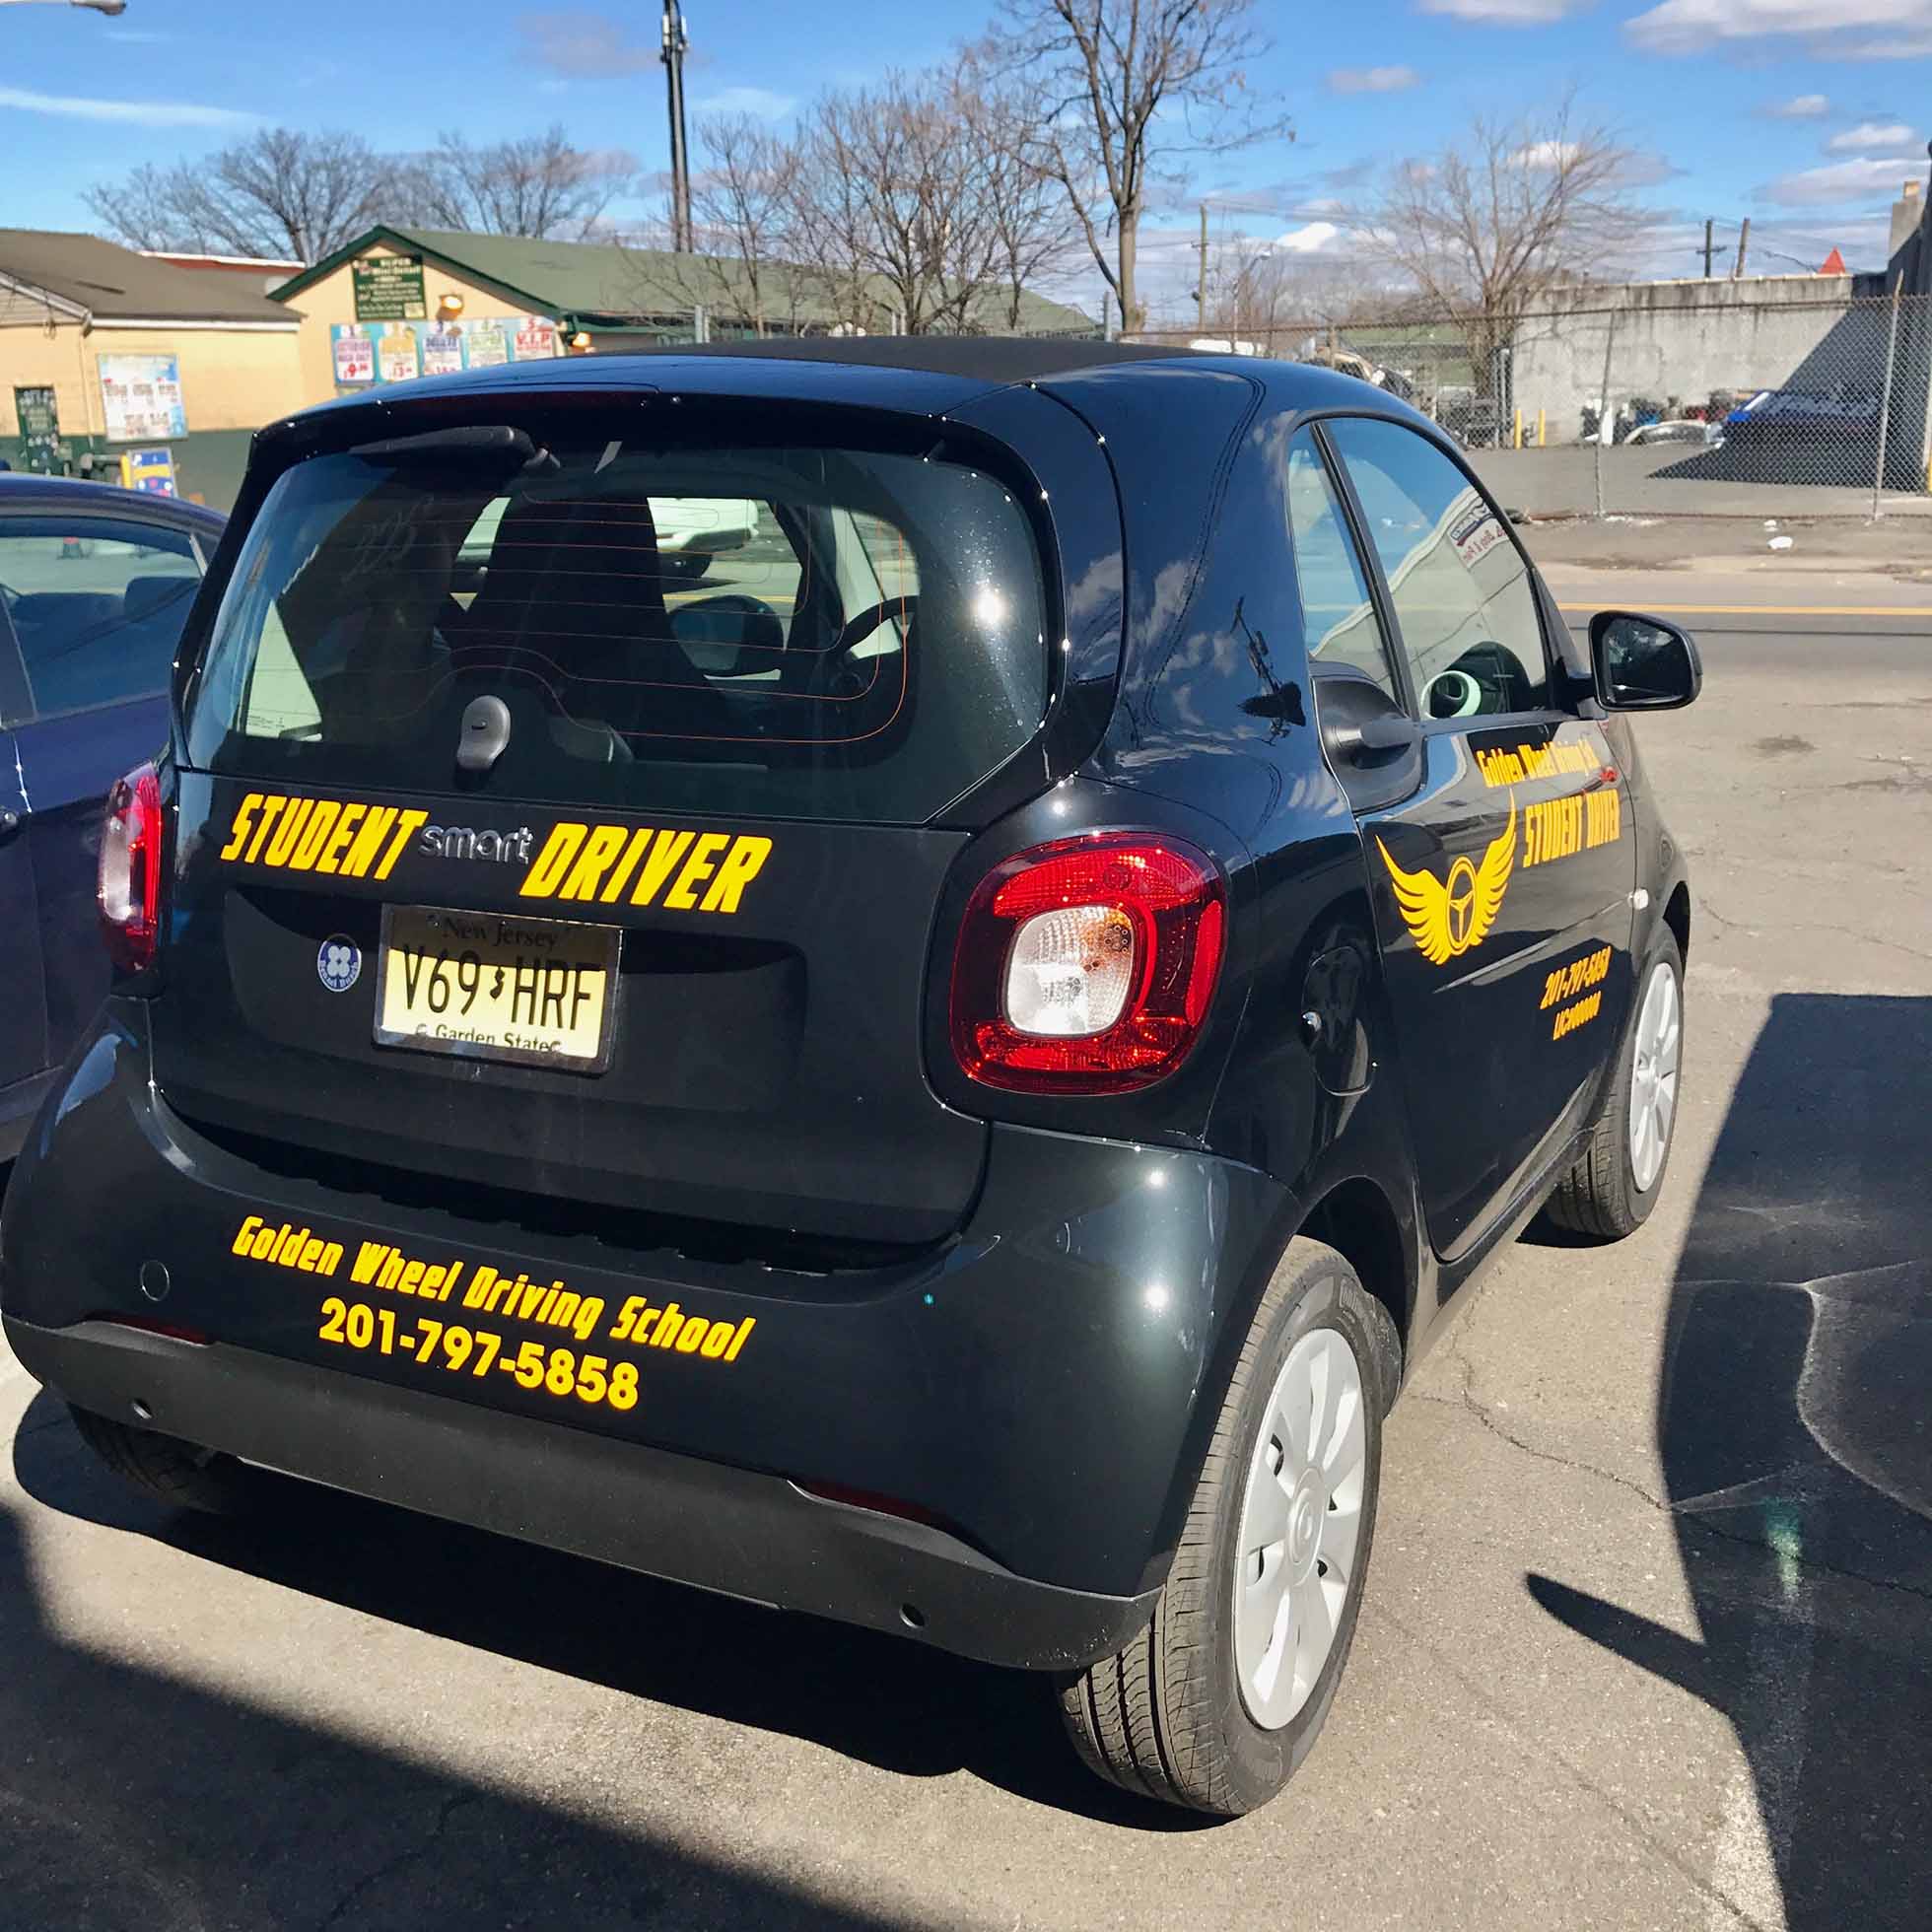 Driving Lessons Golden Wheel Driving School Service In Nj